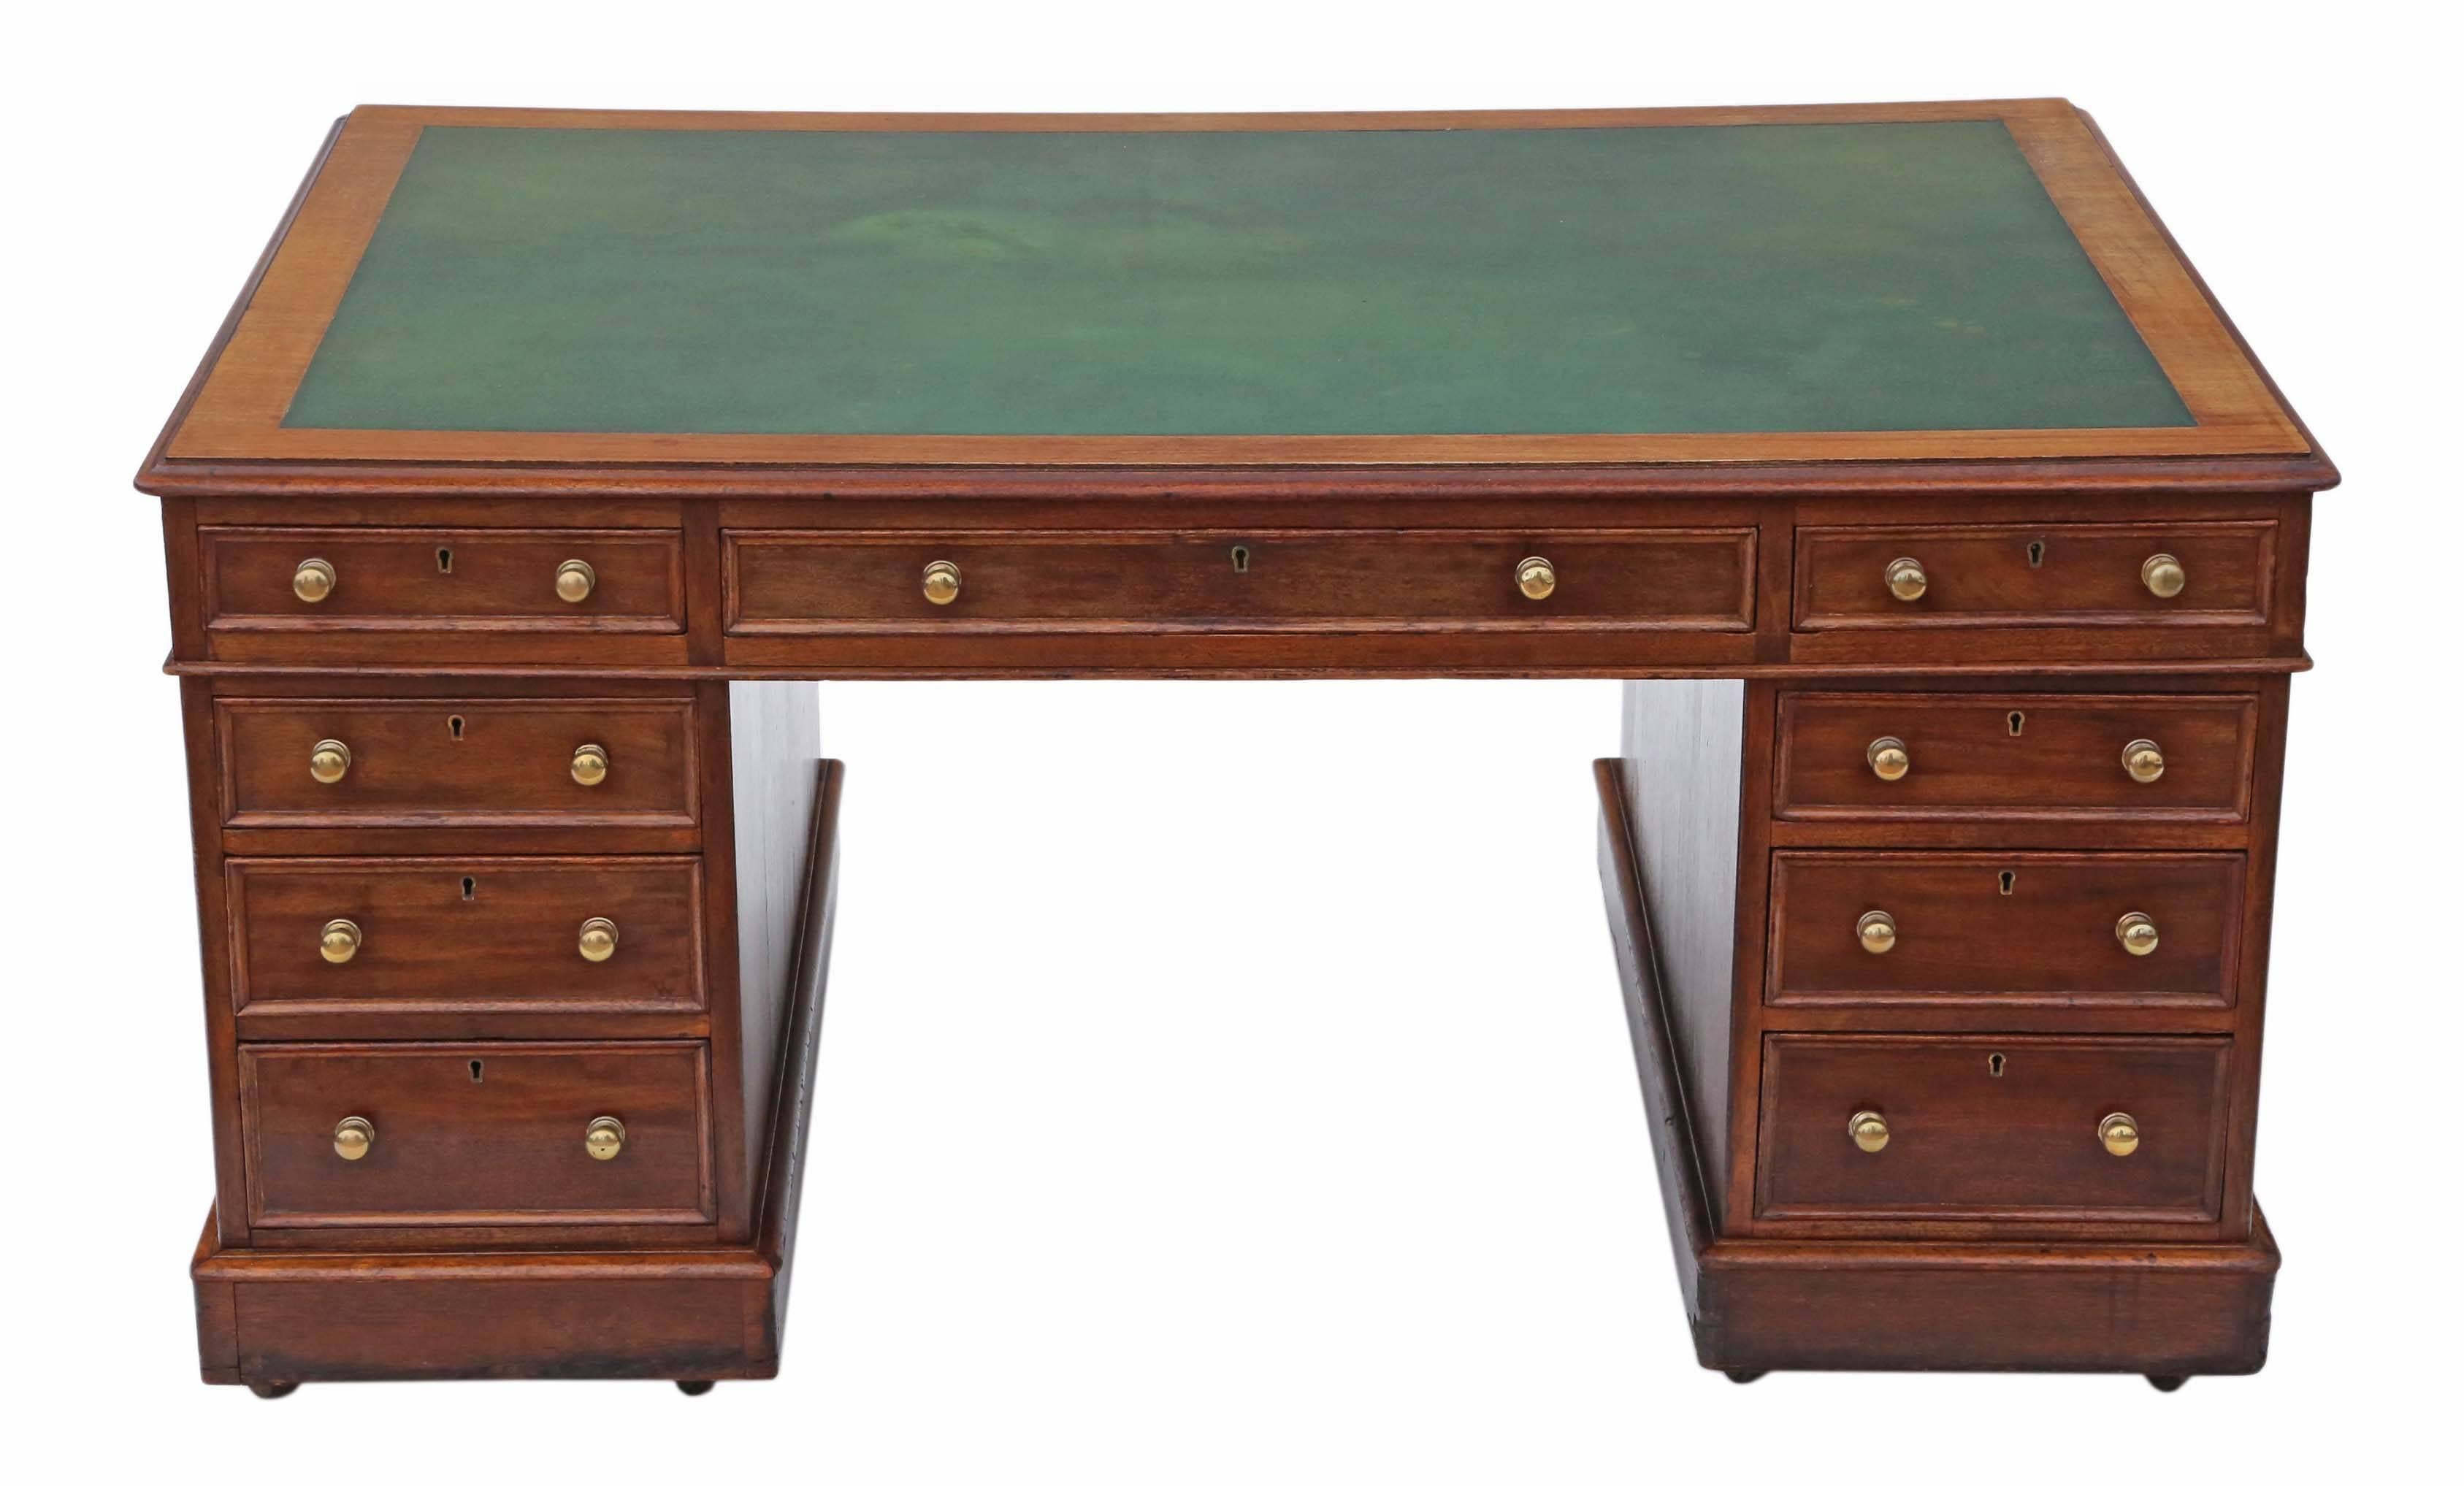 Antique quality large Victorian circa 1890 mahogany partner's desk measures approximately 5' x 3'6. 

No loose joints. Full of age, character and charm. The mahogany lined drawers slide freely. Period concealed wooden castors (some wear as one would